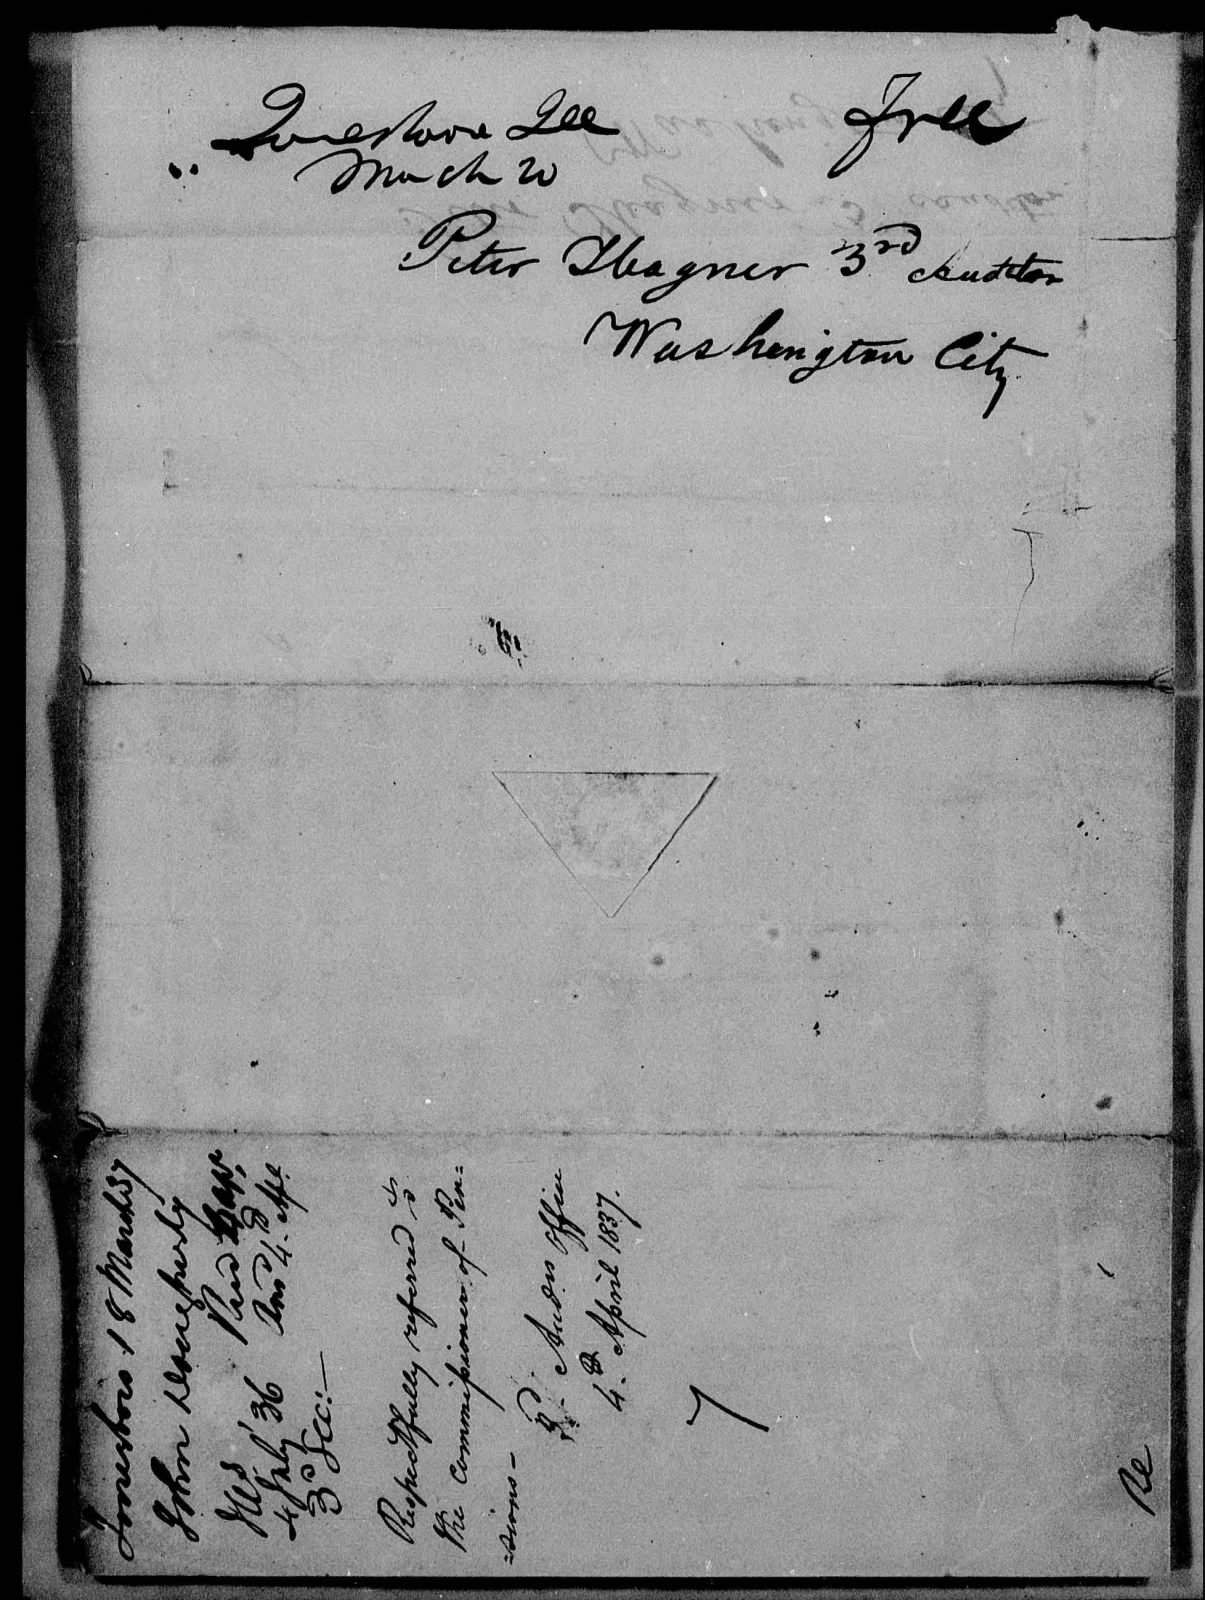 Letter from John Dougherty to Peter Heagner, 18 March 1837, page 2